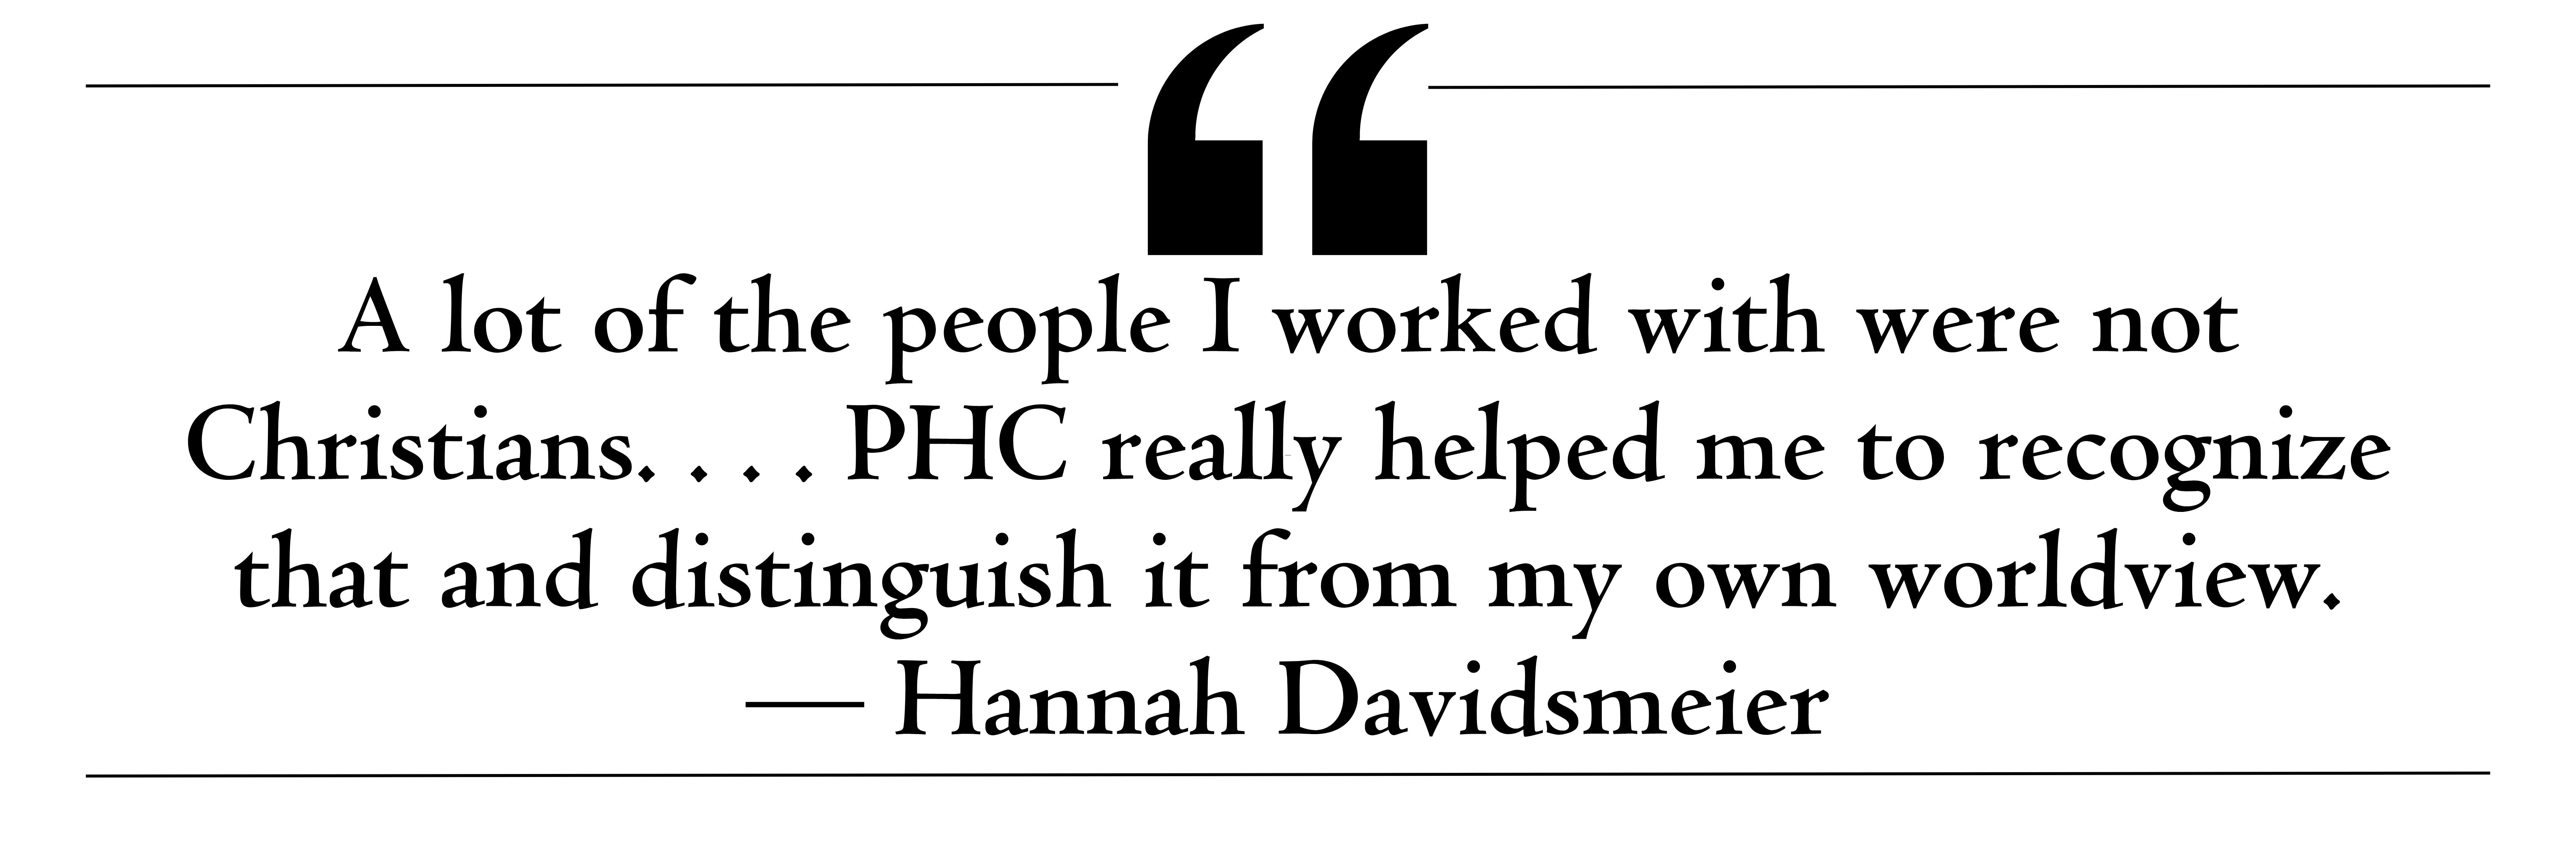 PHC prepared Hannah to understand her worldview